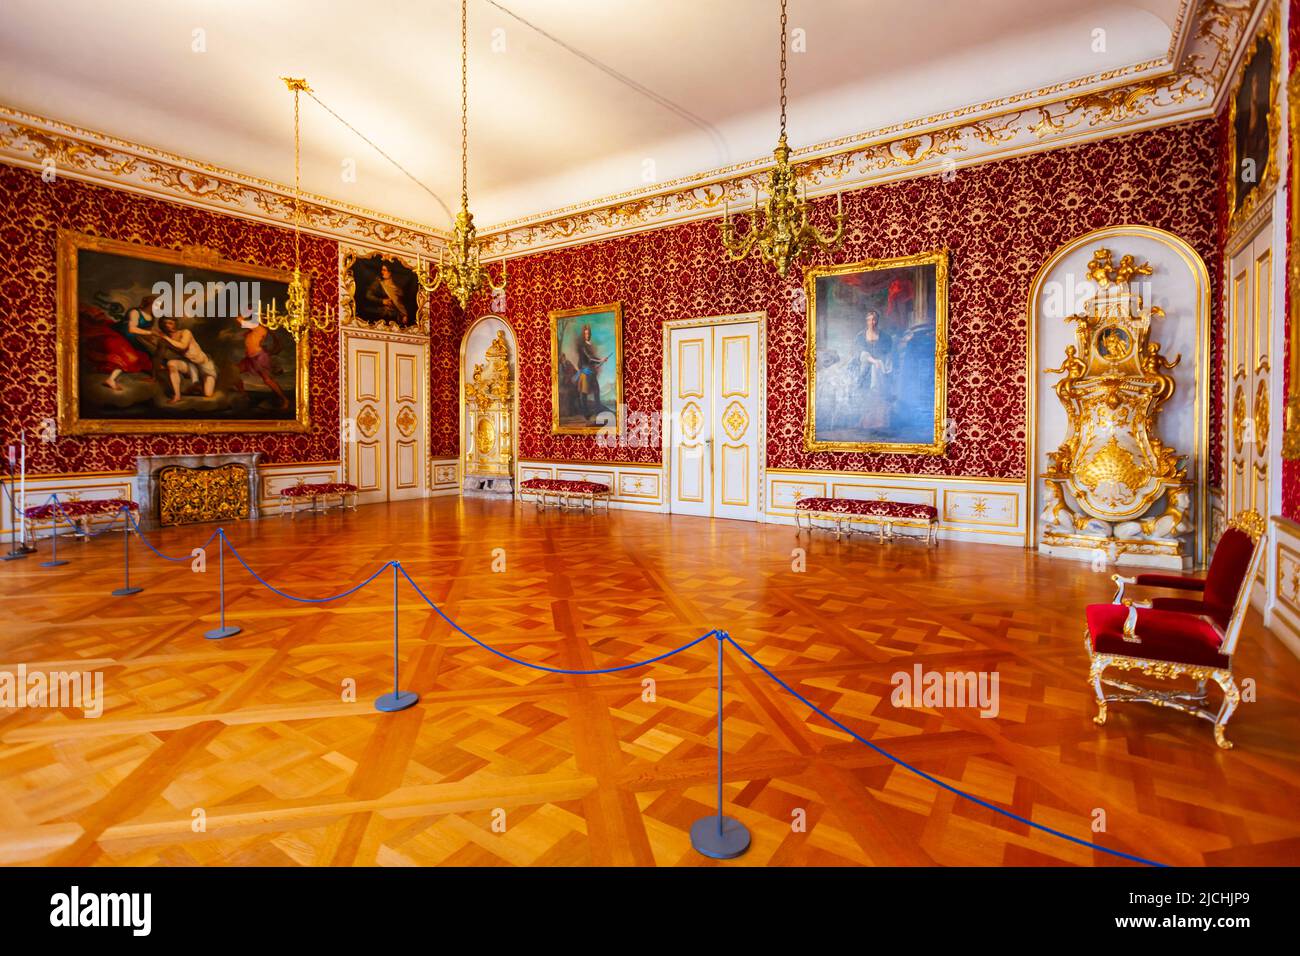 Munich, Germany - July 07, 2021: Munich Residence Museum interior. Munchen Residenz is the former royal palace in Munich, Germany. Stock Photo